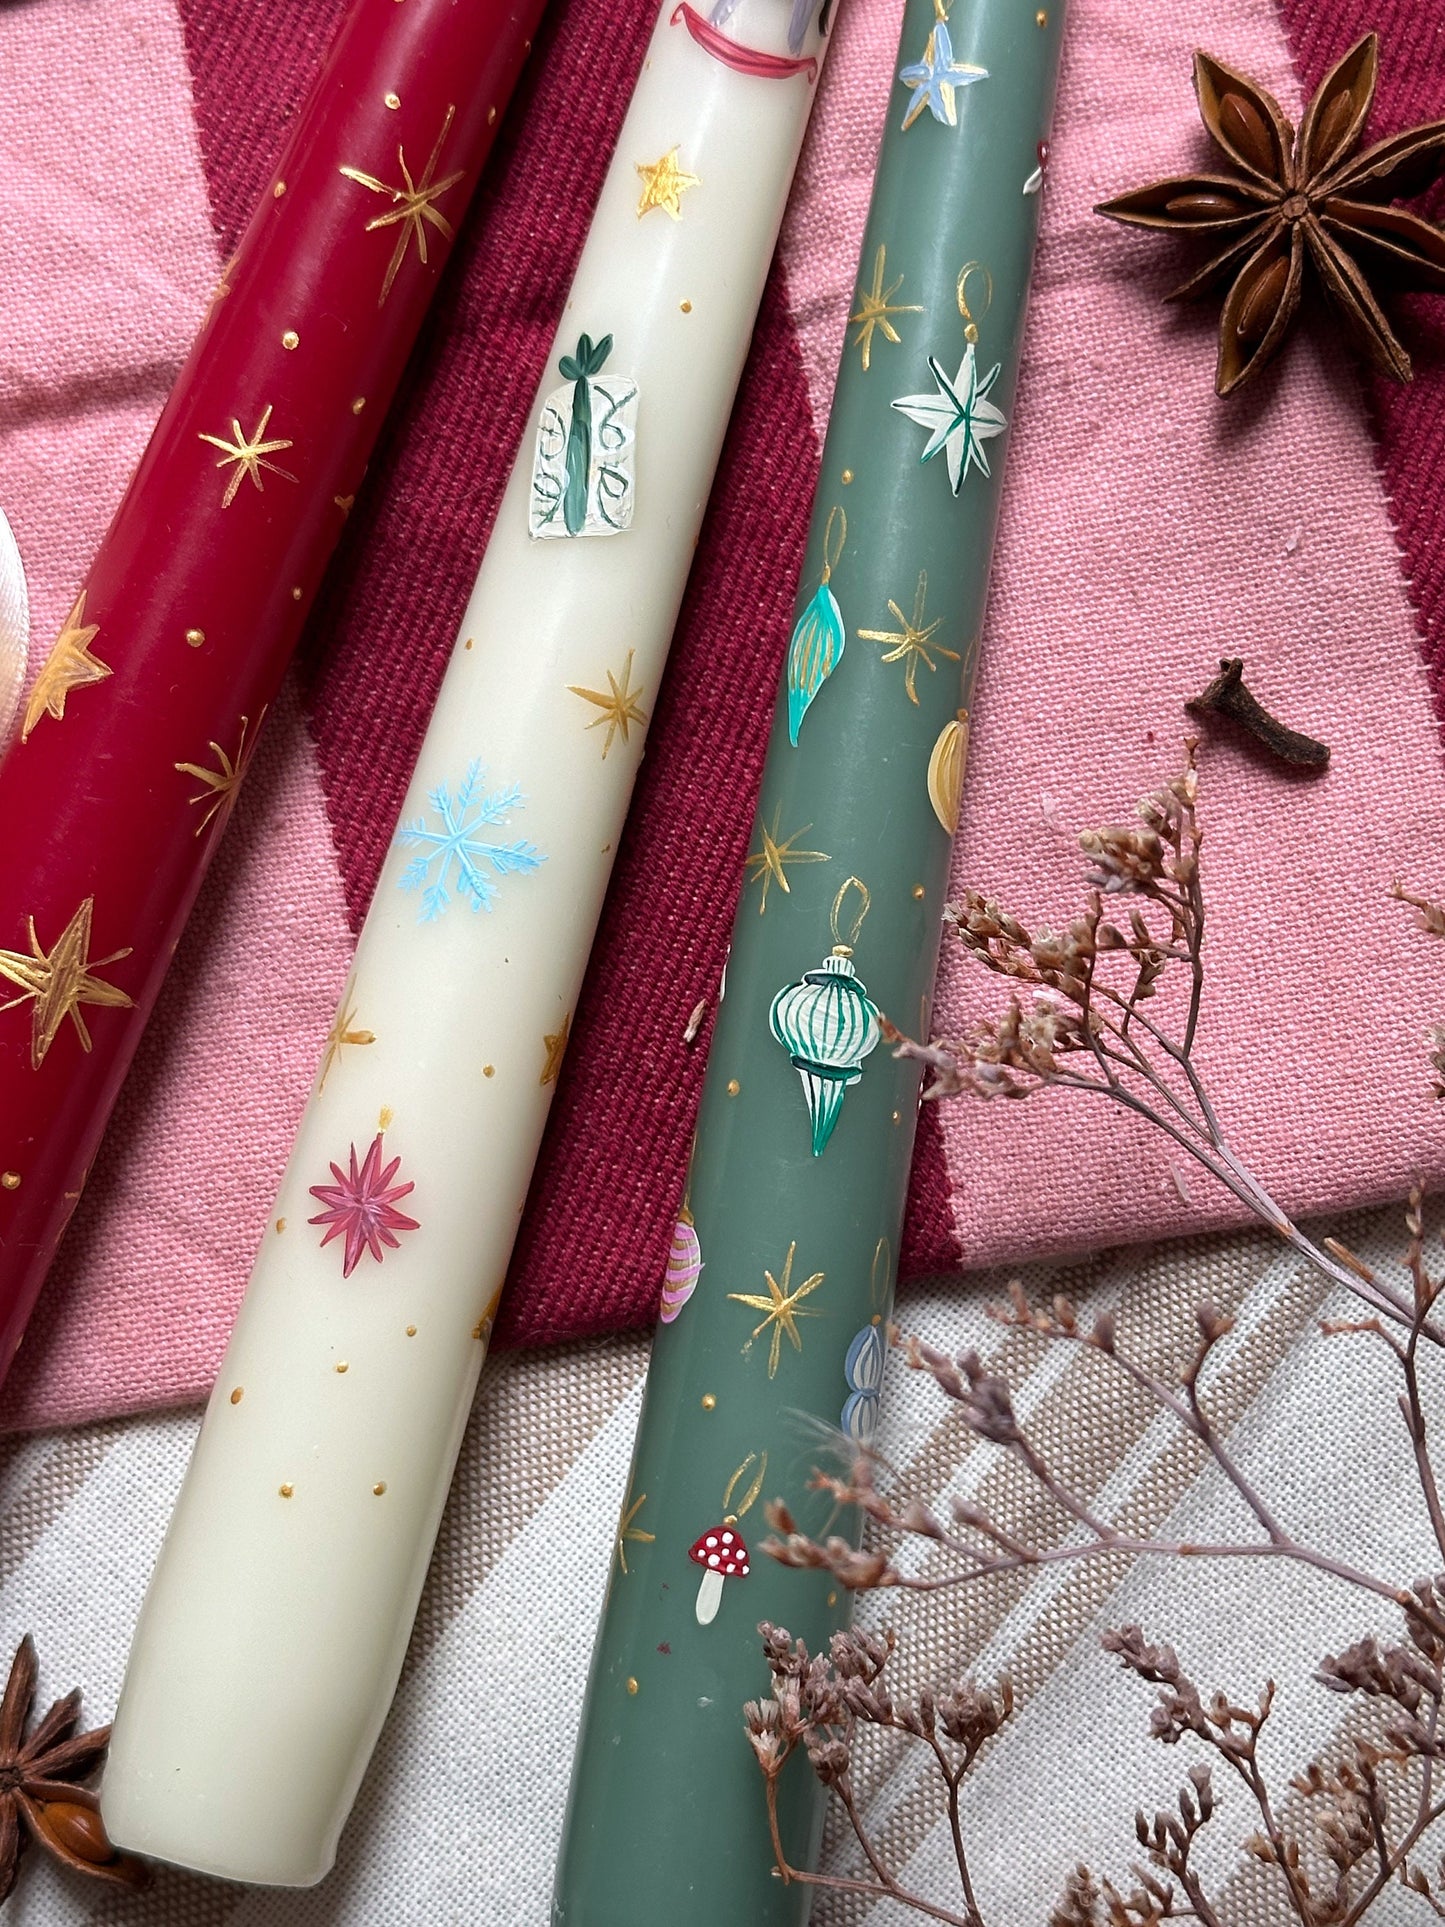 Advent Candle | 24 nights to Christmas | Festive Candle | Hand Painted Festive Candles | Advent Calendar Candle | Dinner Tapered Candles |